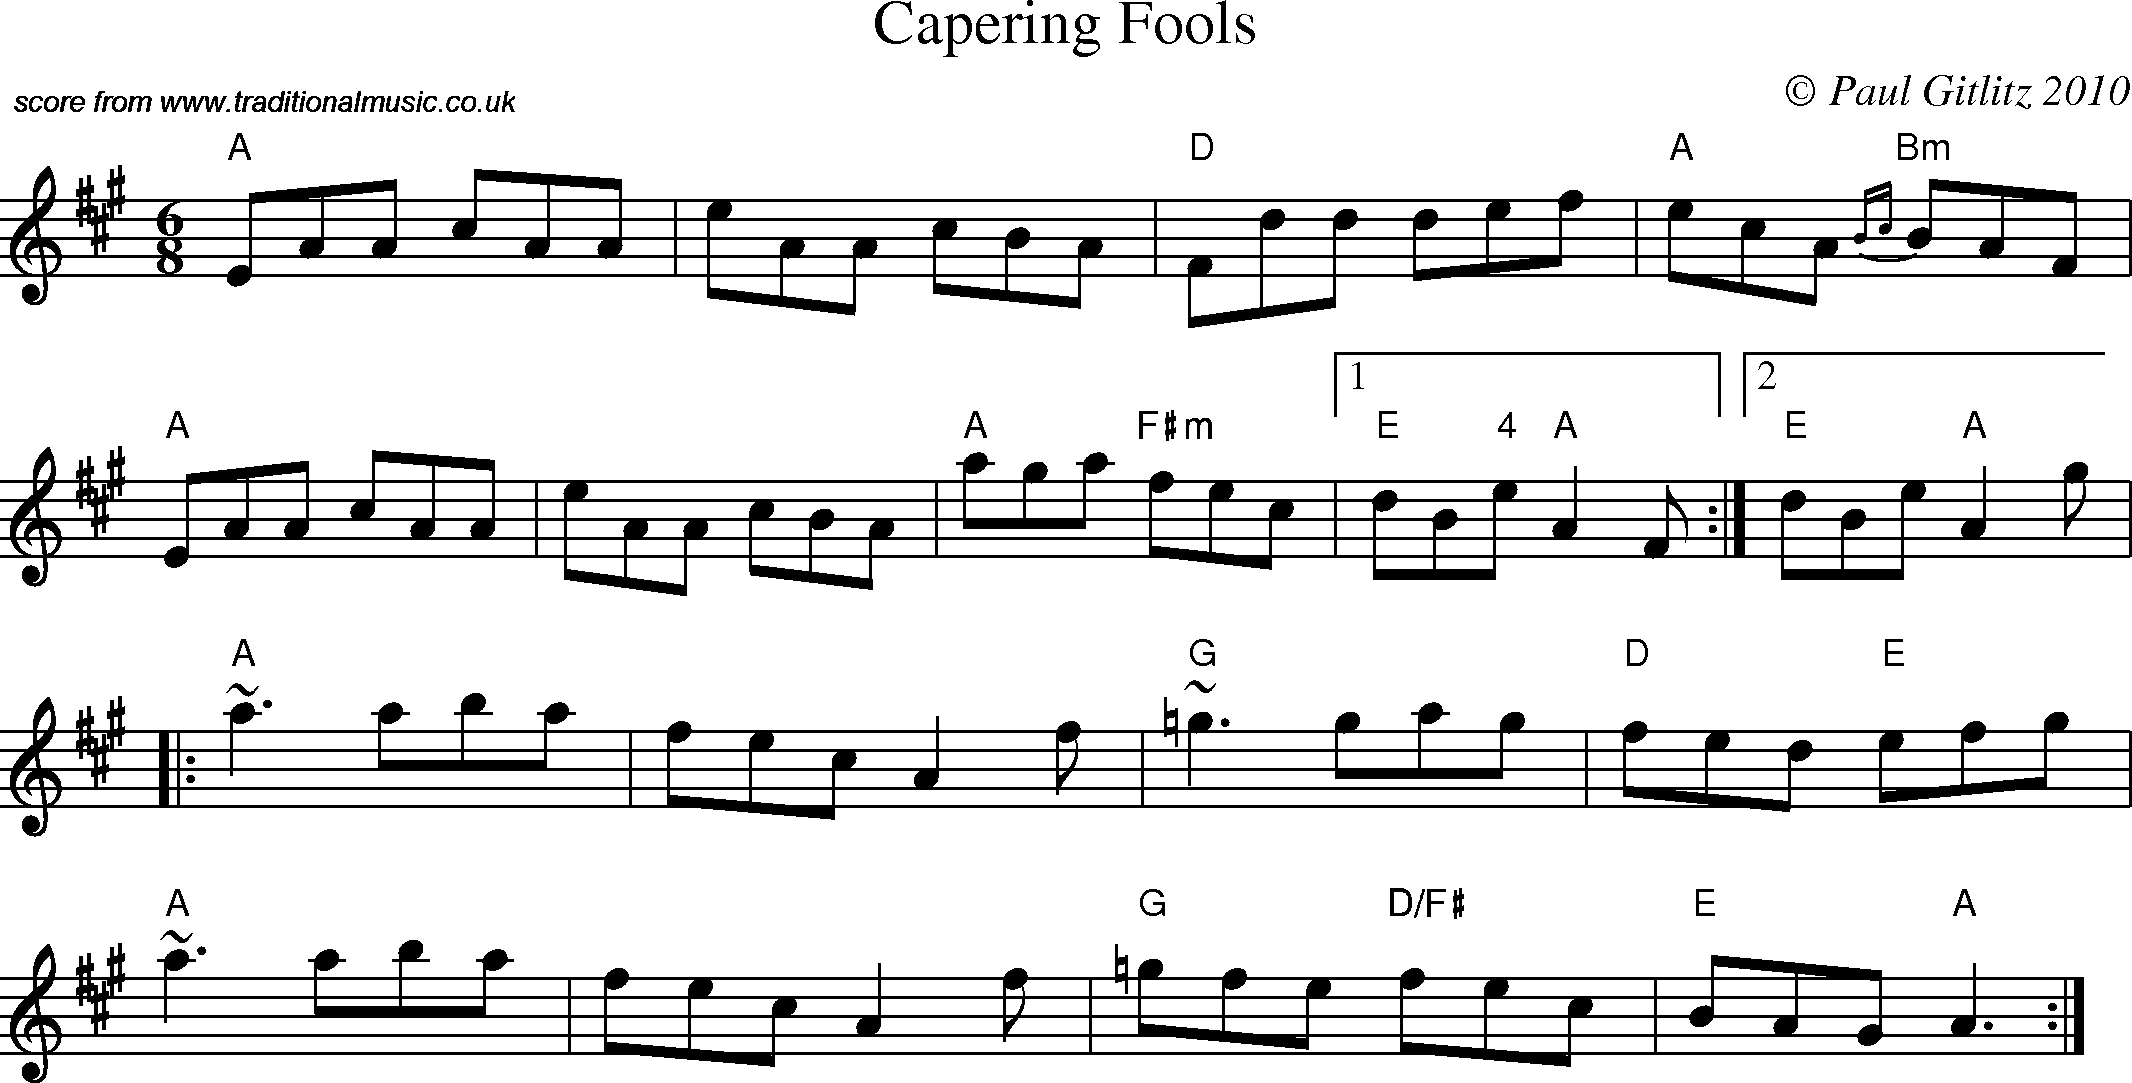 Sheet Music Score for Jig - Capering Fools